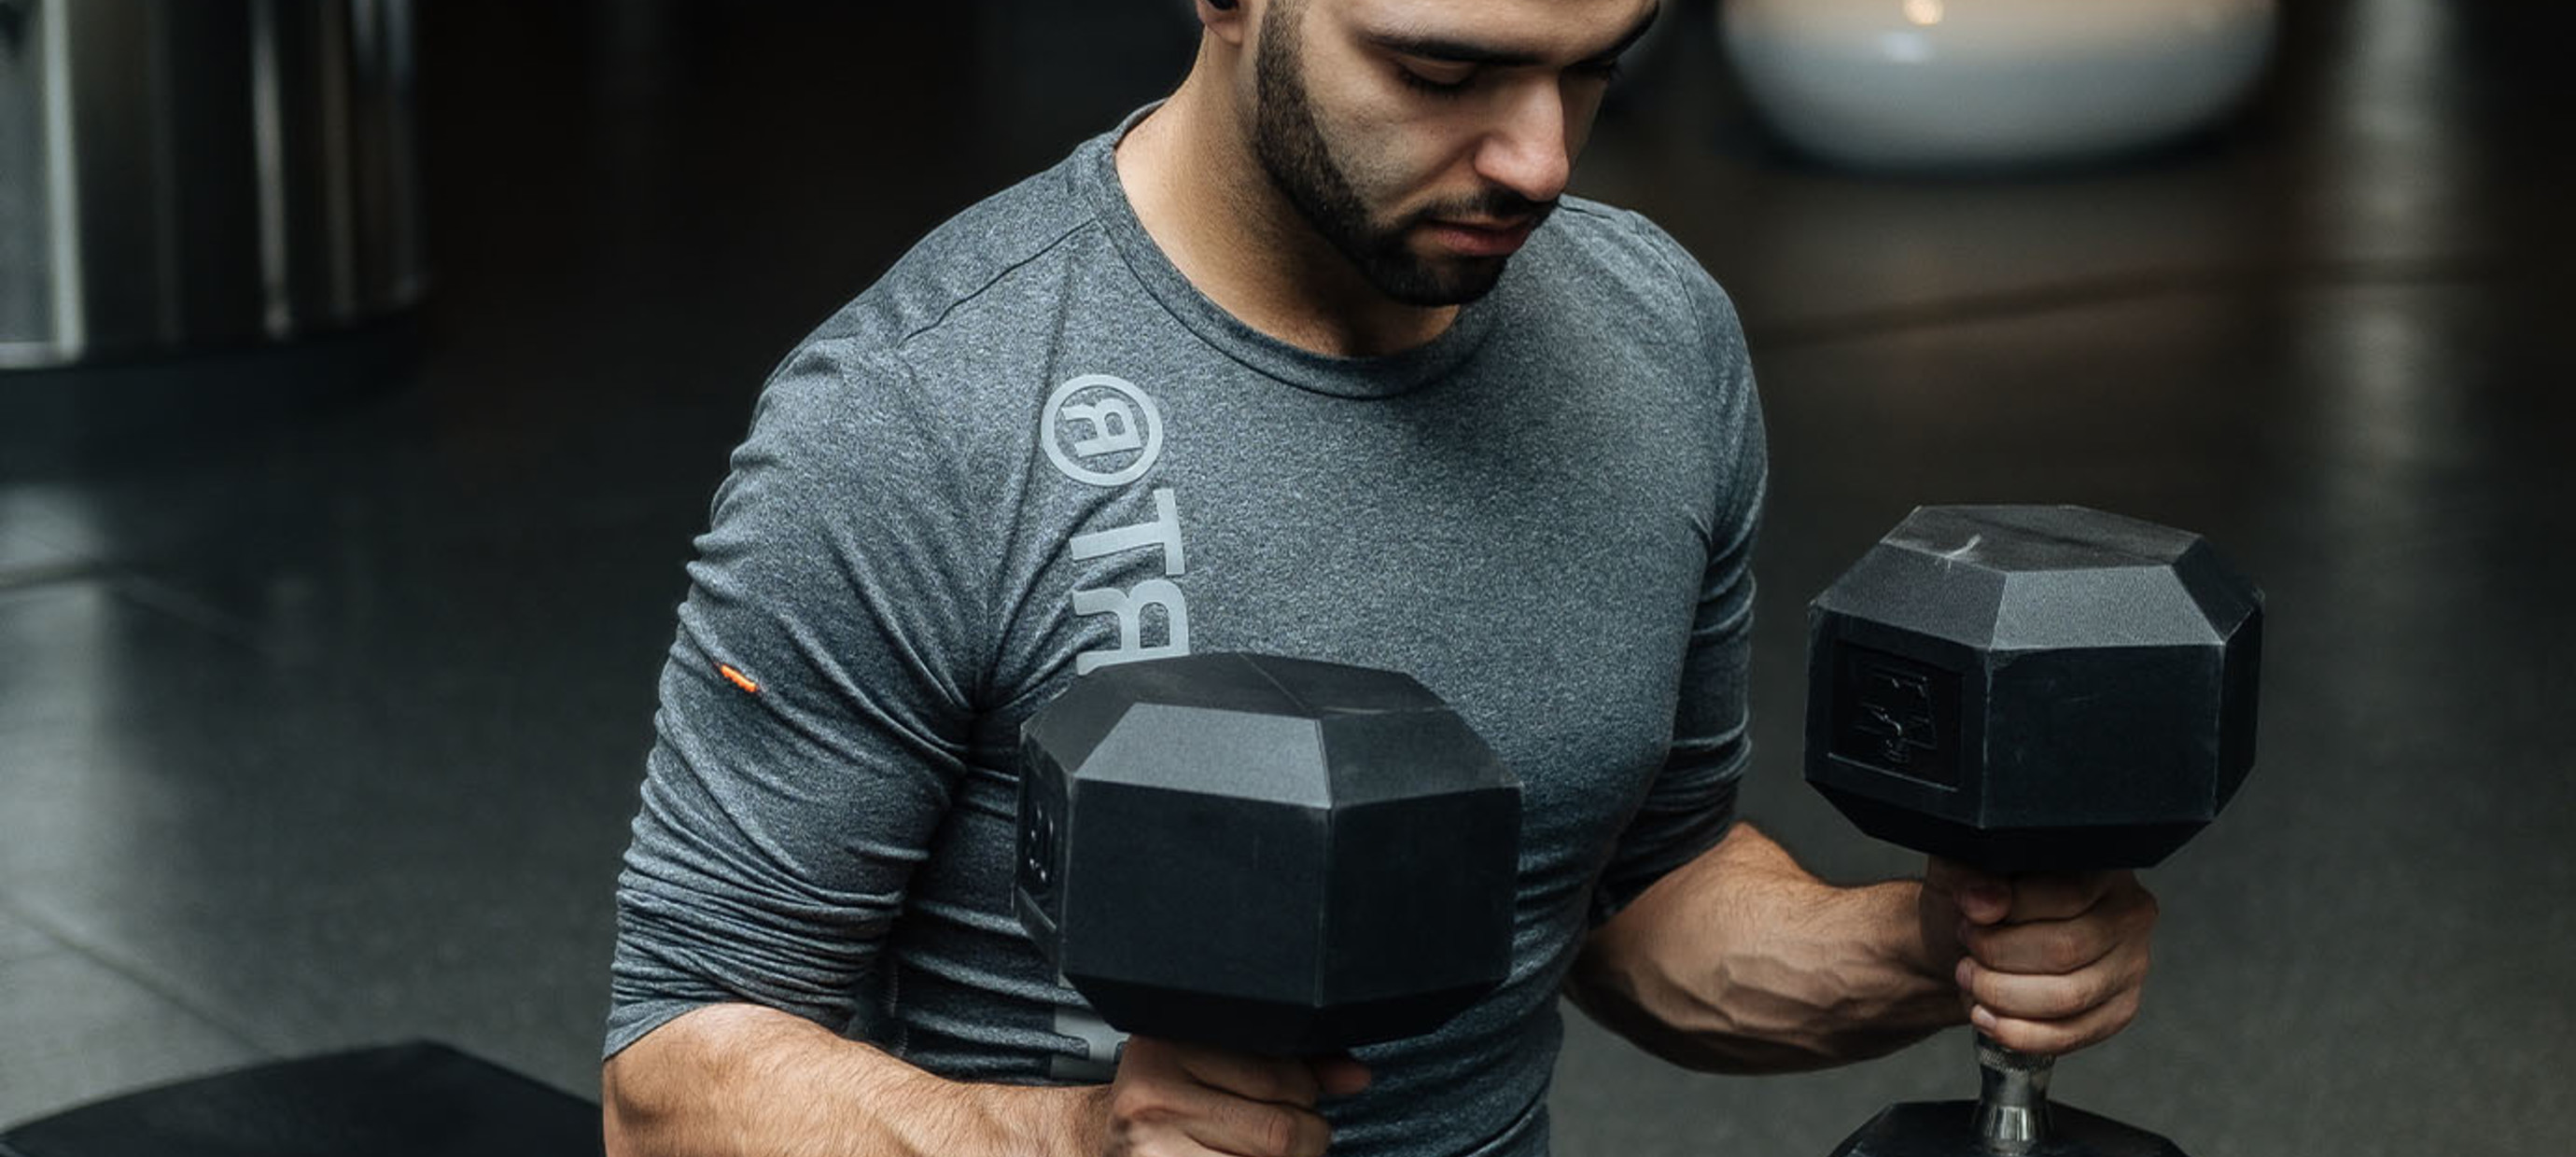 Factors That Affect The Price of Dumbbells